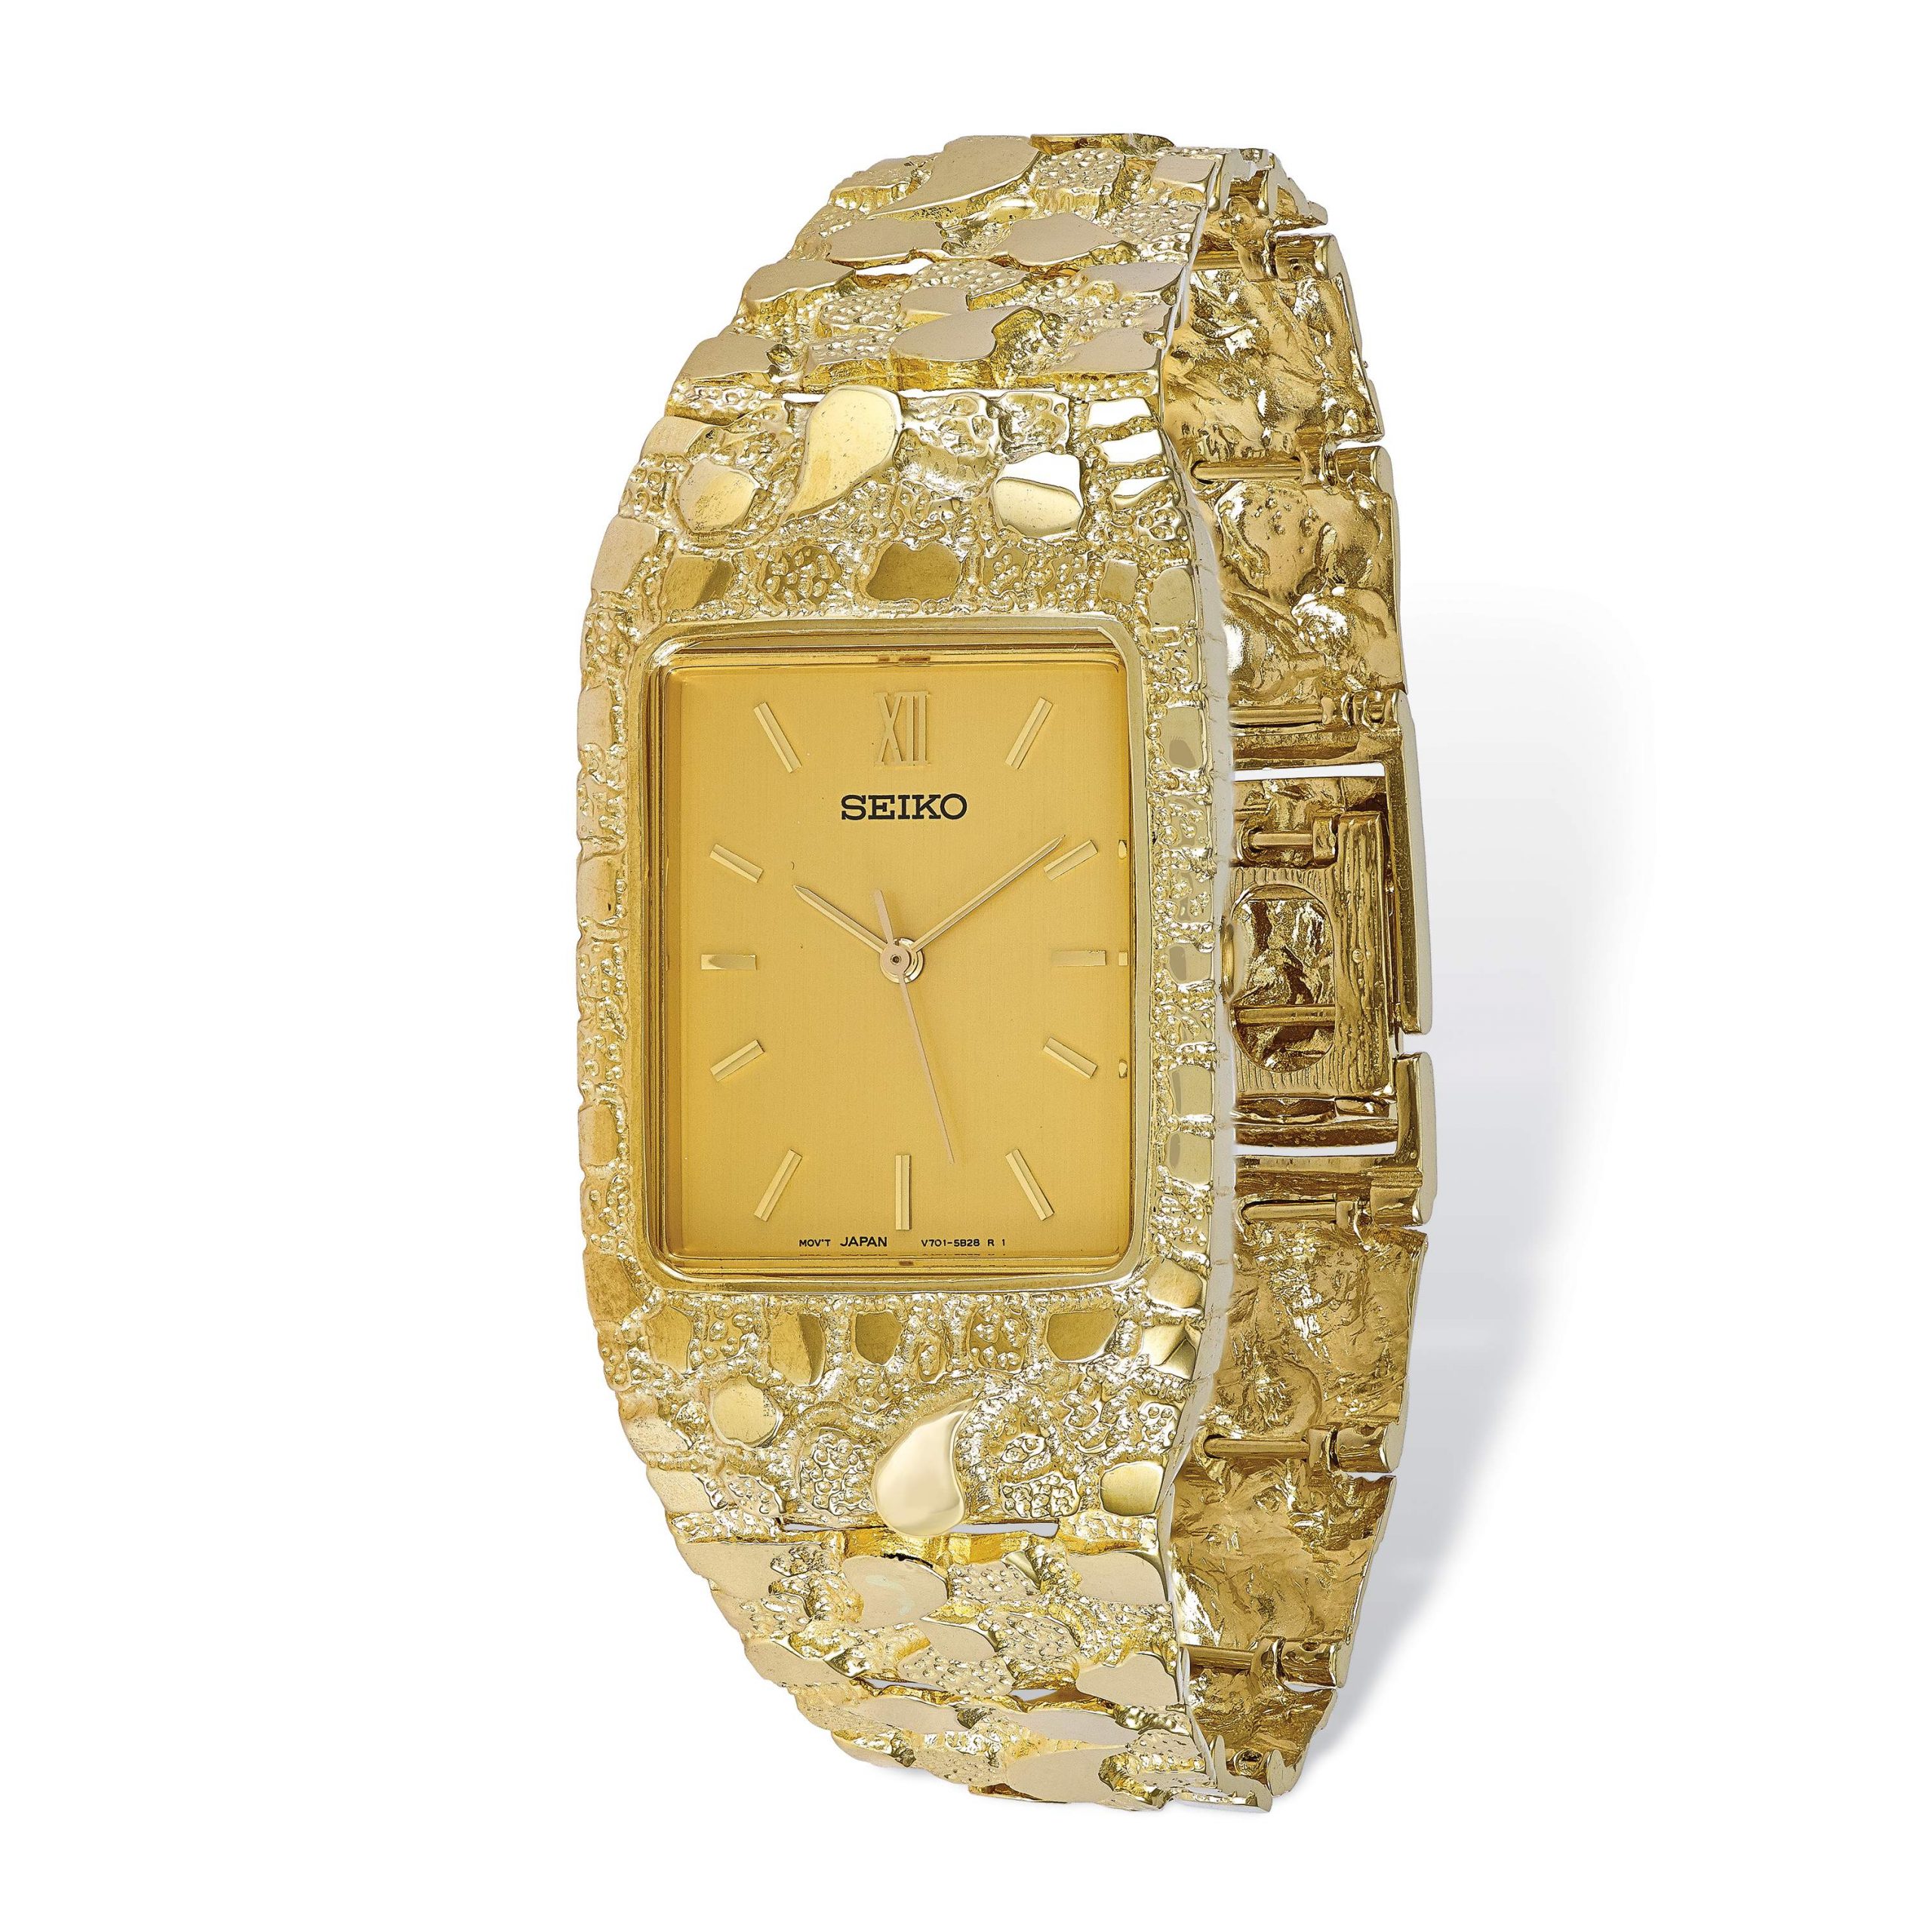 10k Champagne 27x47mm Dial Square Face Nugget Watch 並行輸入品 メンズ腕時計